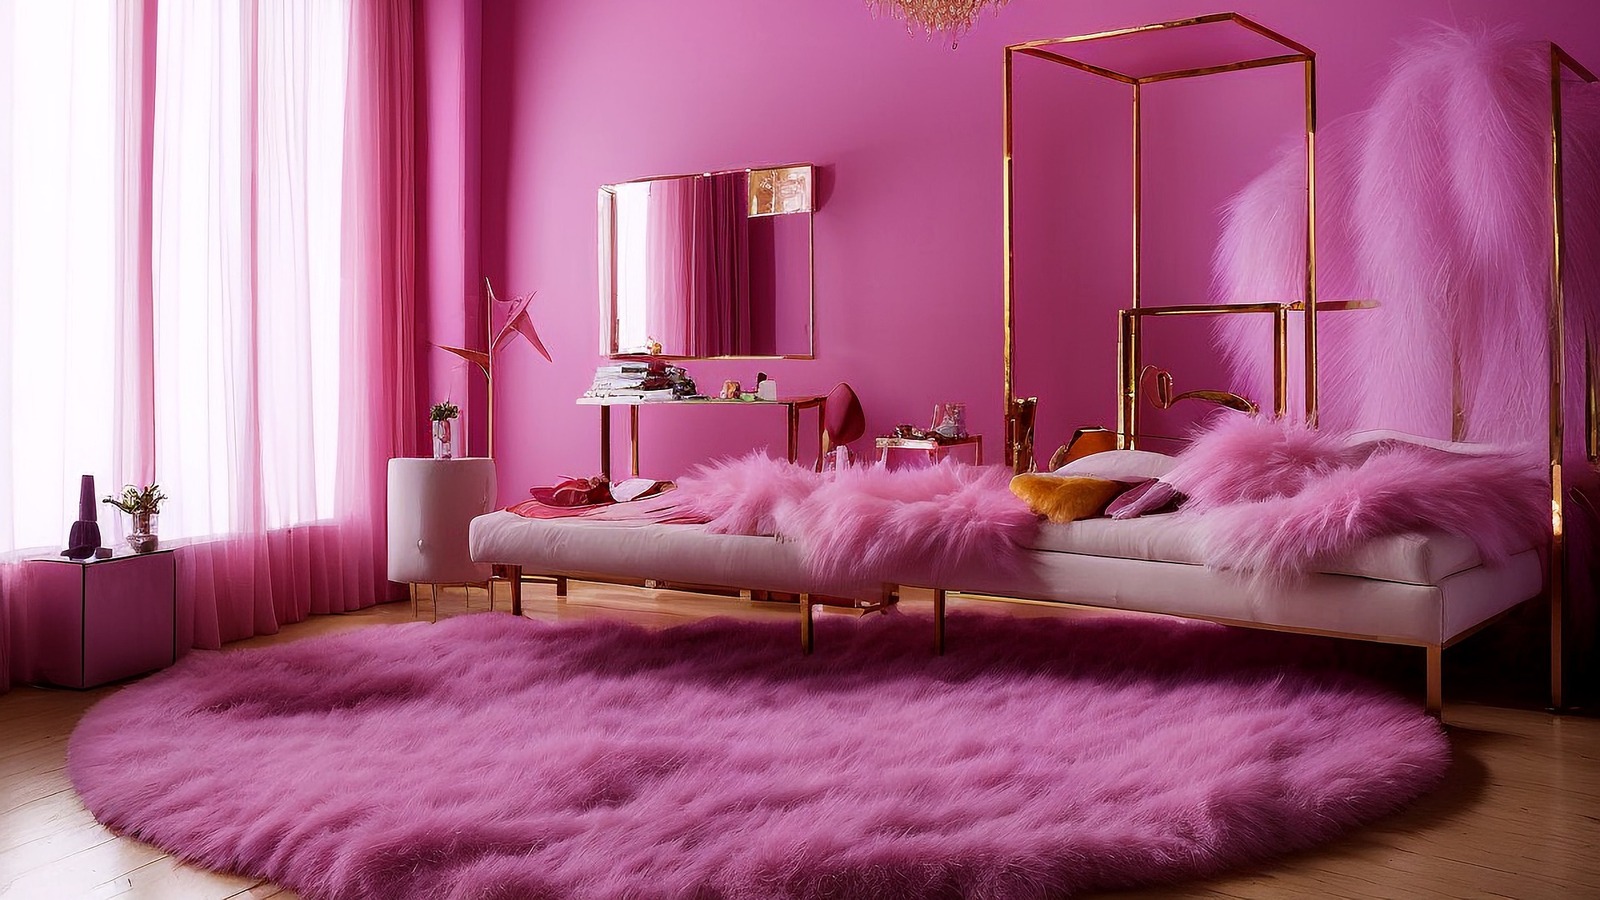 5 TikTok Decor Trends That are Out in 2023 - PureWow